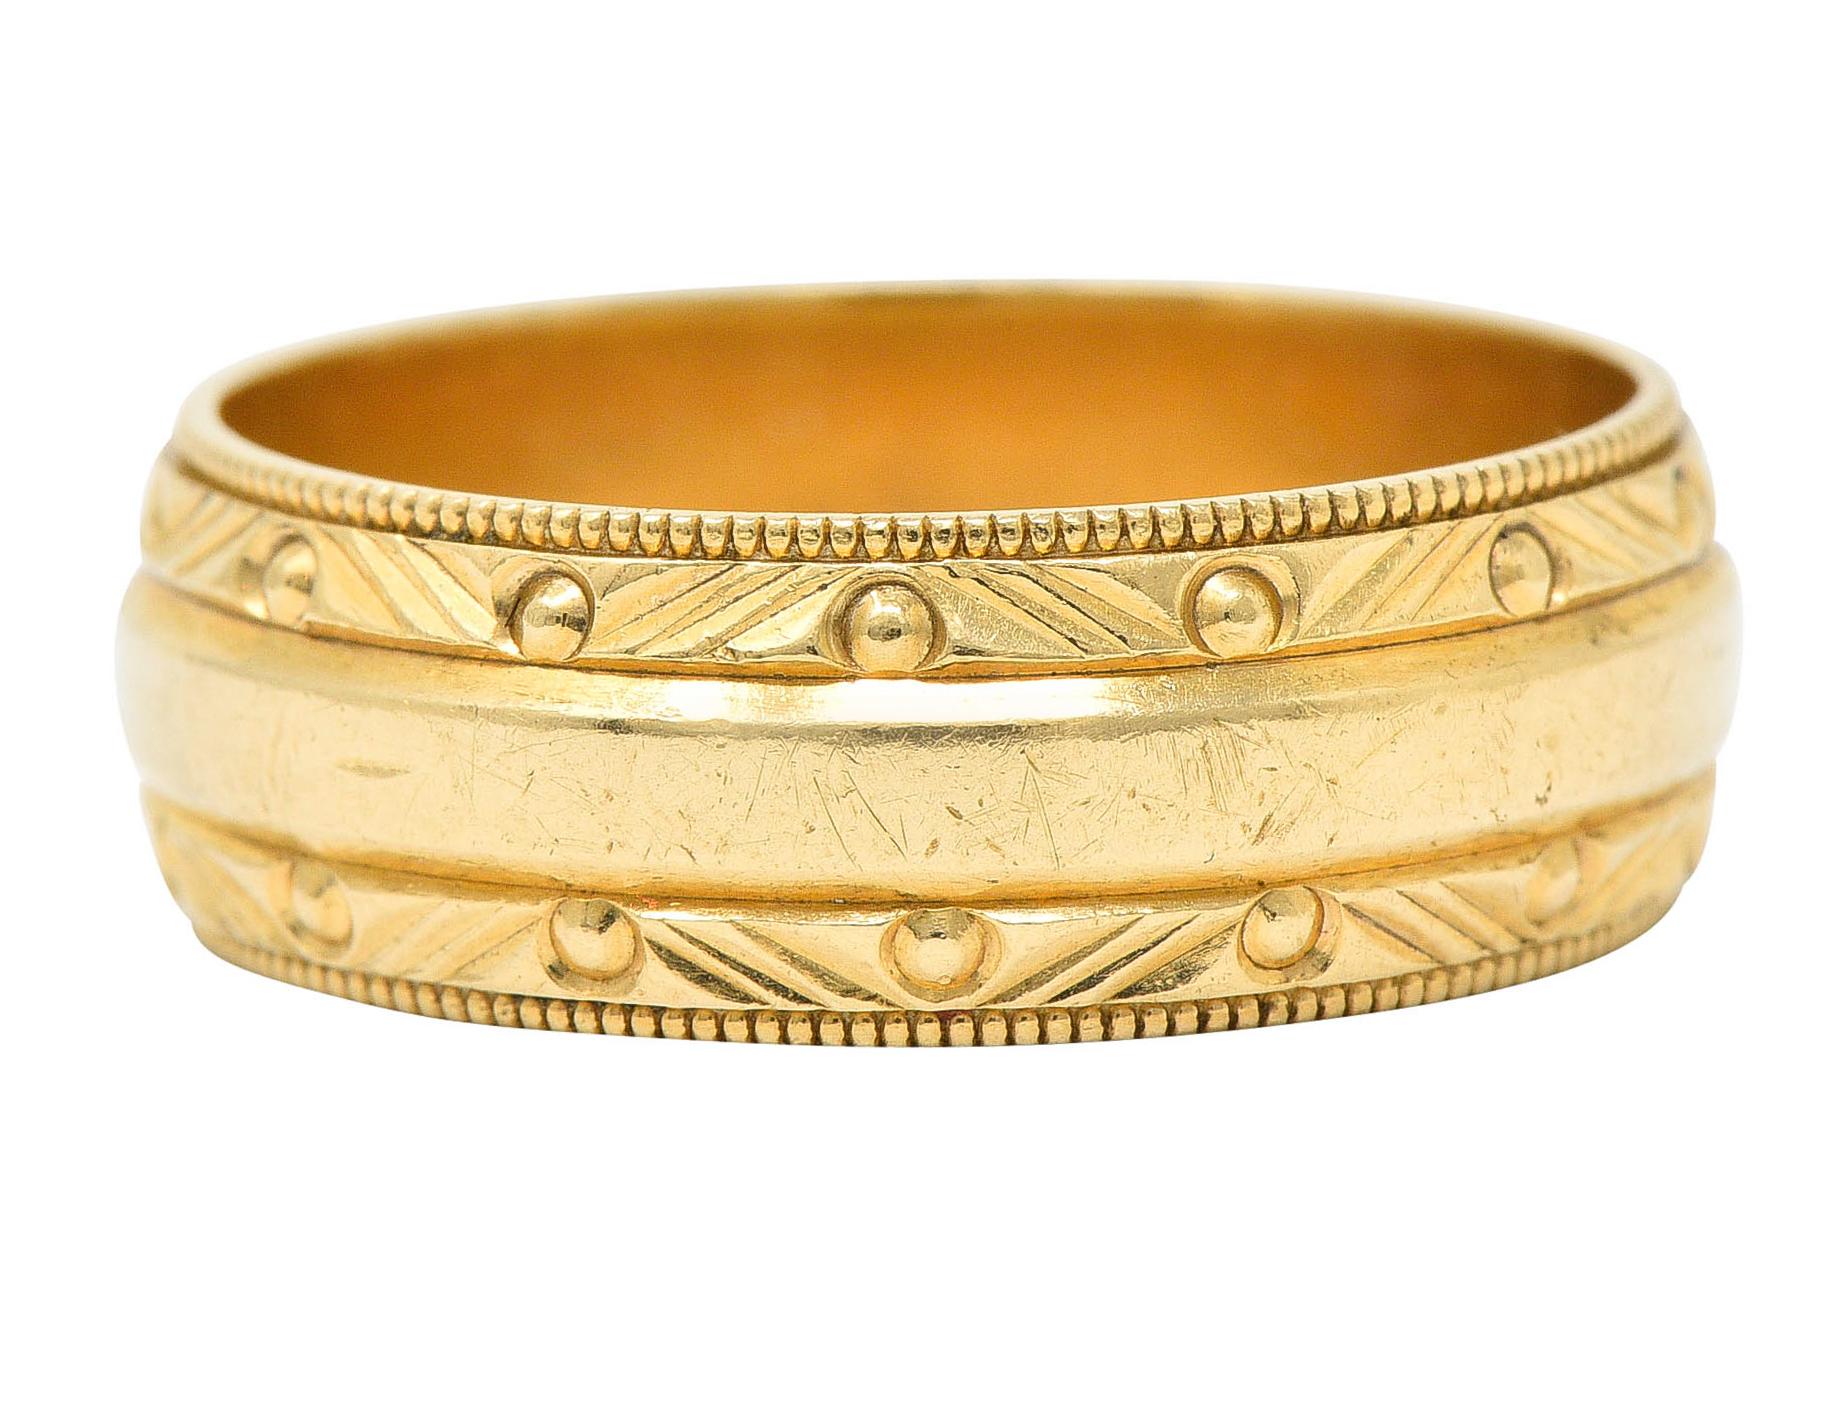 Wide band ring is designed with a smooth center and milgrain edges

With a faceted motif accented by gold beading

Maker's mark and stamped 14K for 14 karat gold

Circa: 1940s

Ring Size: 9 1/2 & sizable

Measures North to South 7.2 mm and sits 1.7